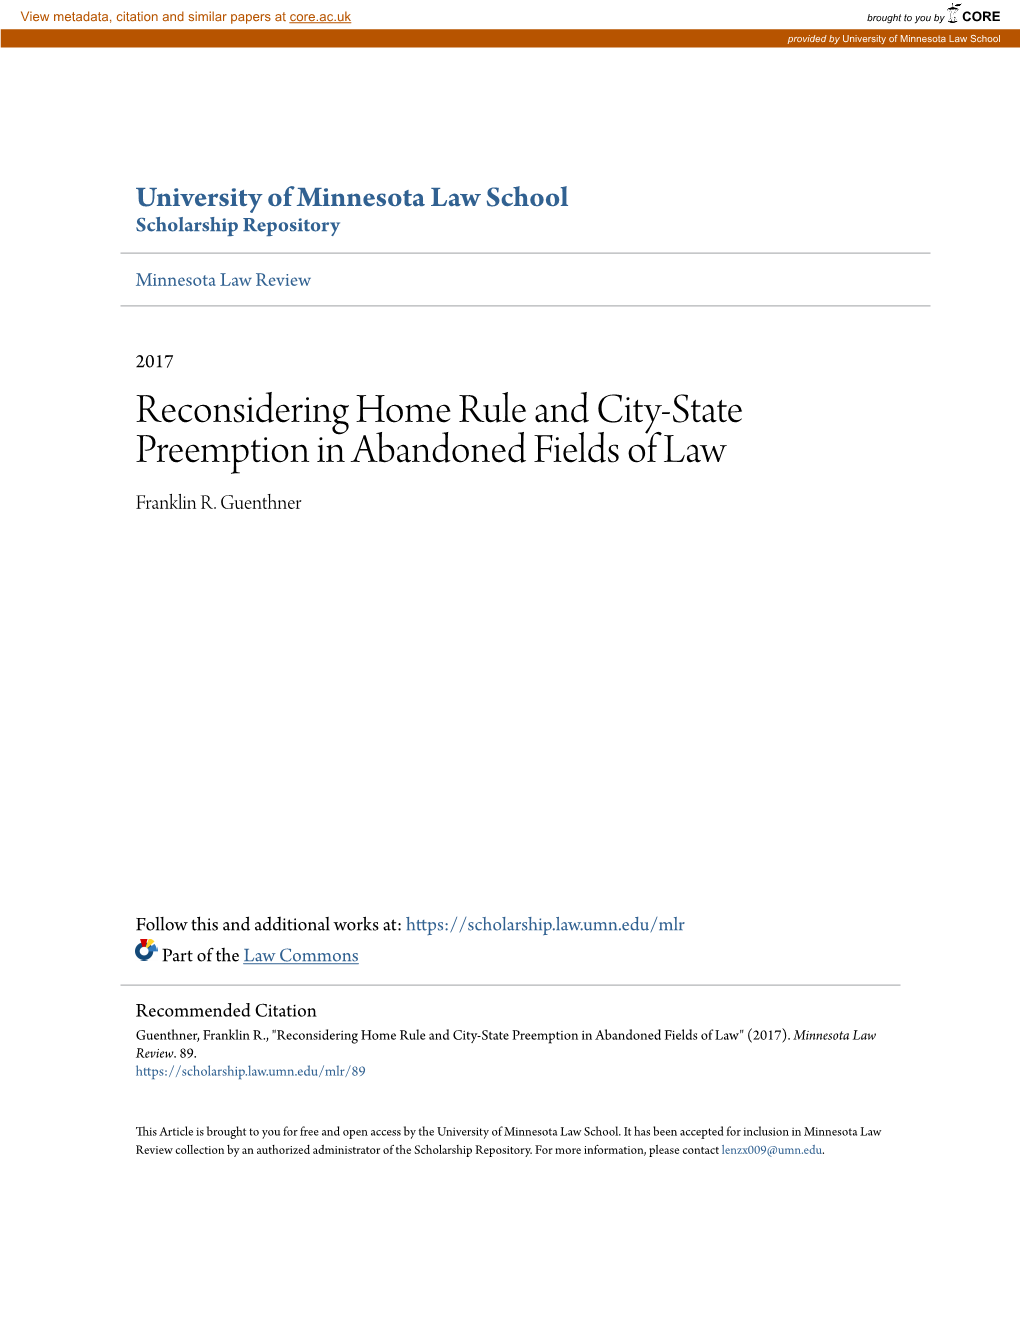 Reconsidering Home Rule and City-State Preemption in Abandoned Fields of Law Franklin R